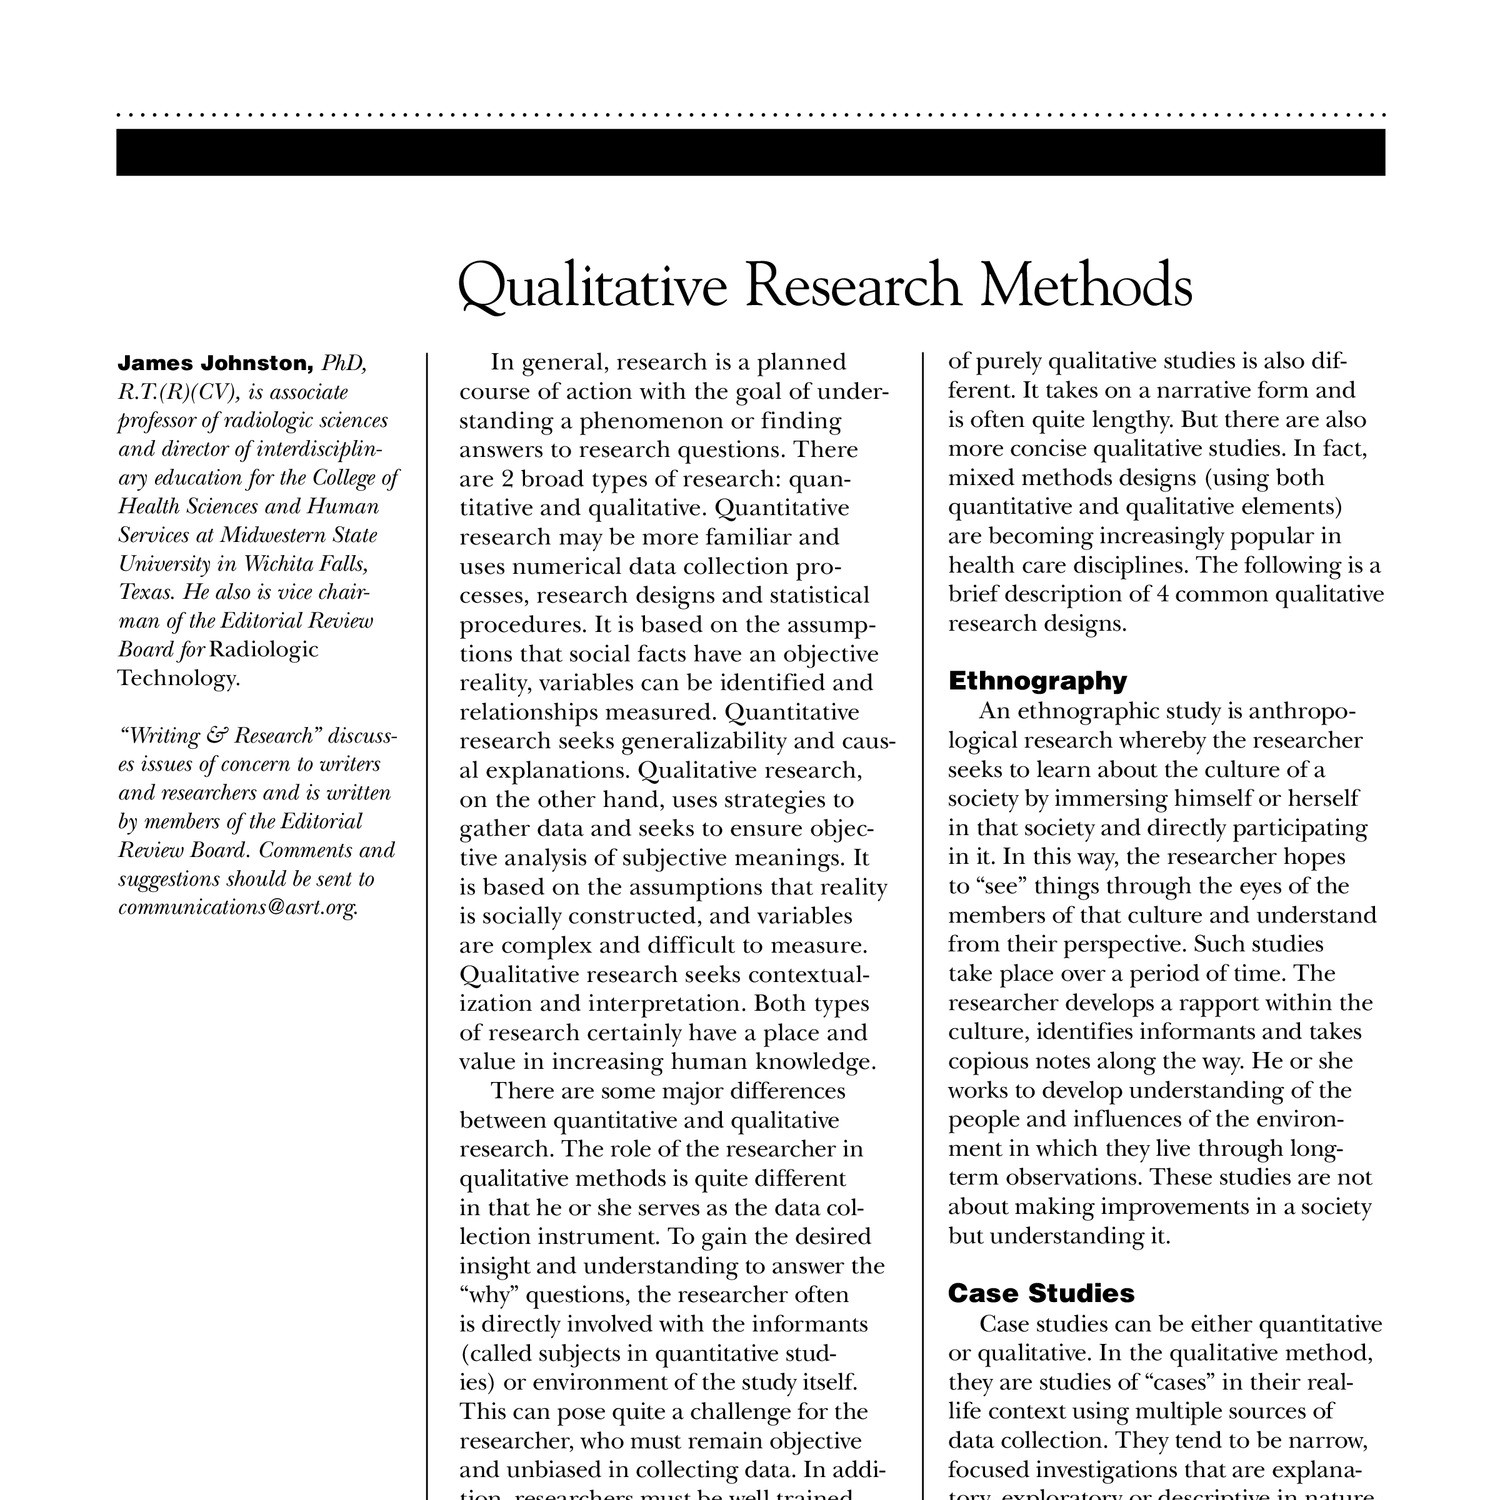 research on methods pdf